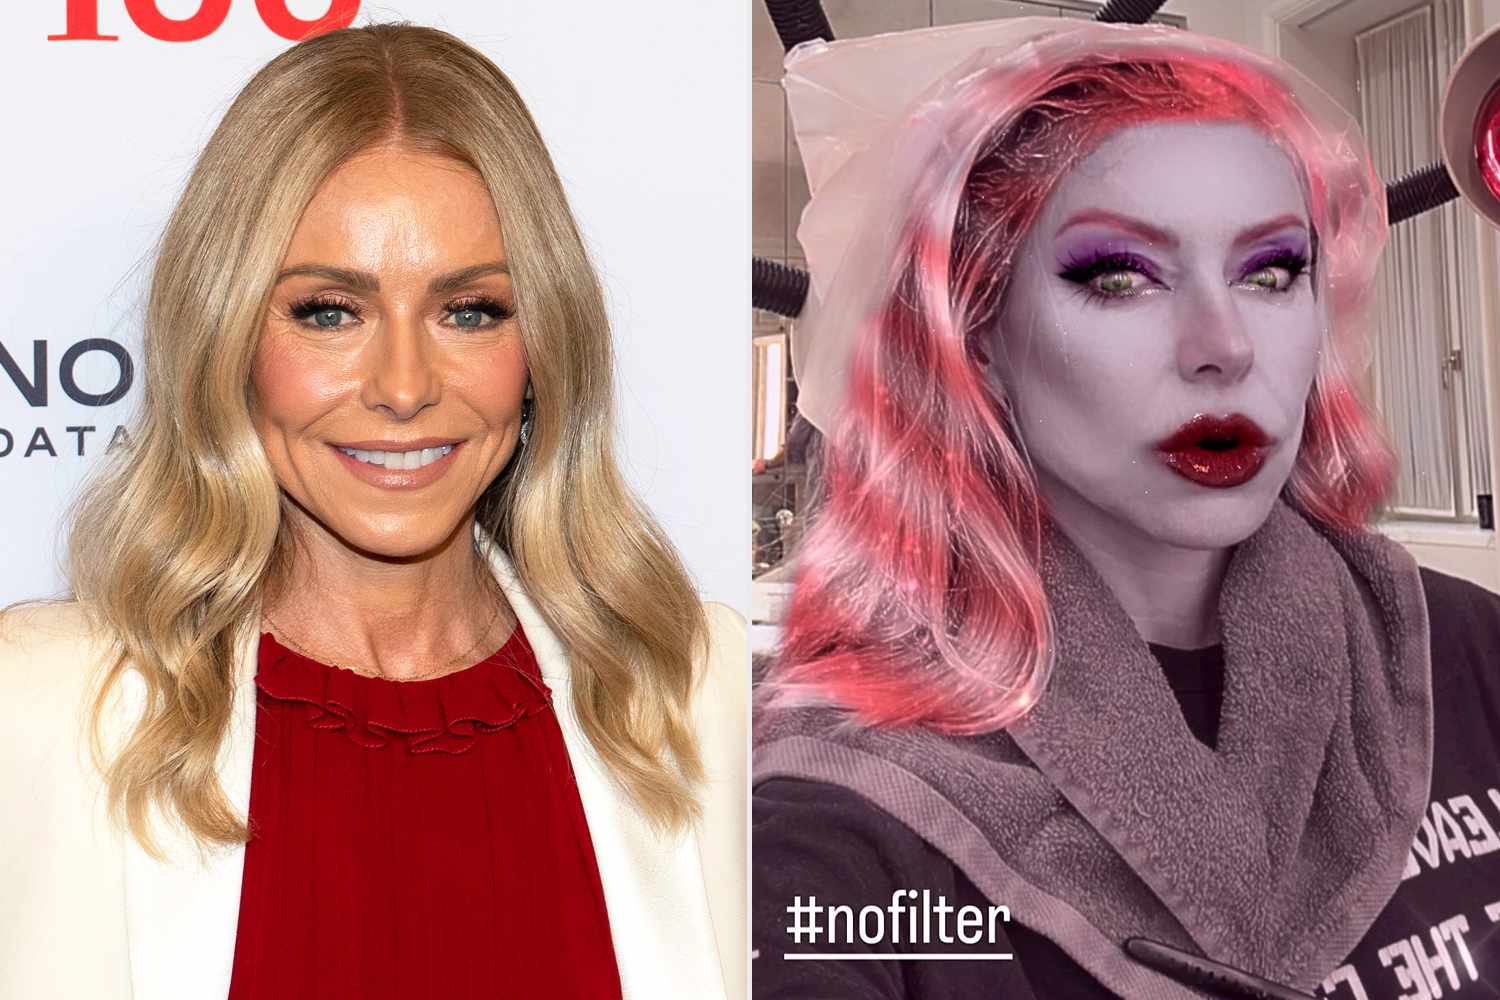 Kelly Ripa Shares a Hilarious Behind the Scenes Look at Her Elaborate Hair Dyeing Process: 'No Filter'